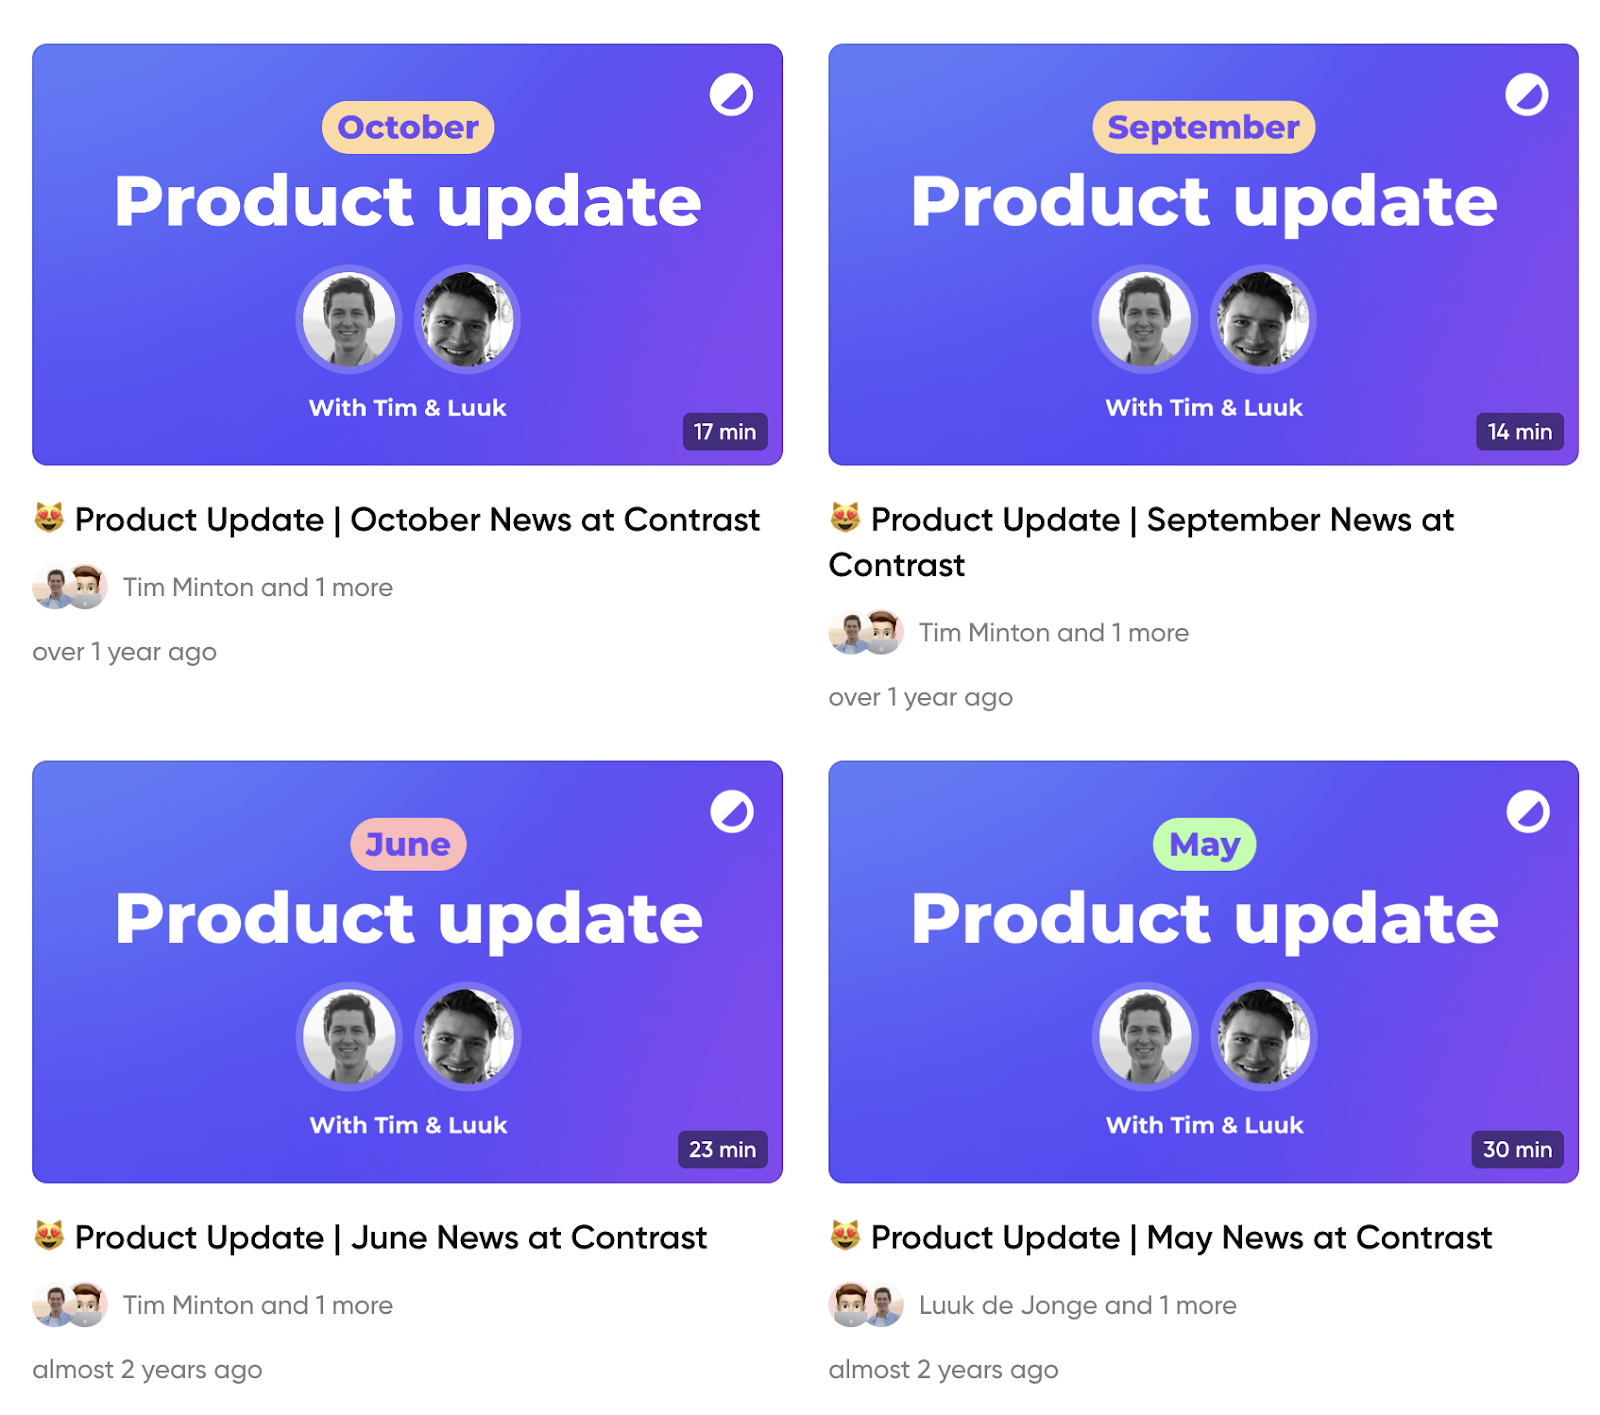 Screenshot of product updates being hosted on the Contrast platform